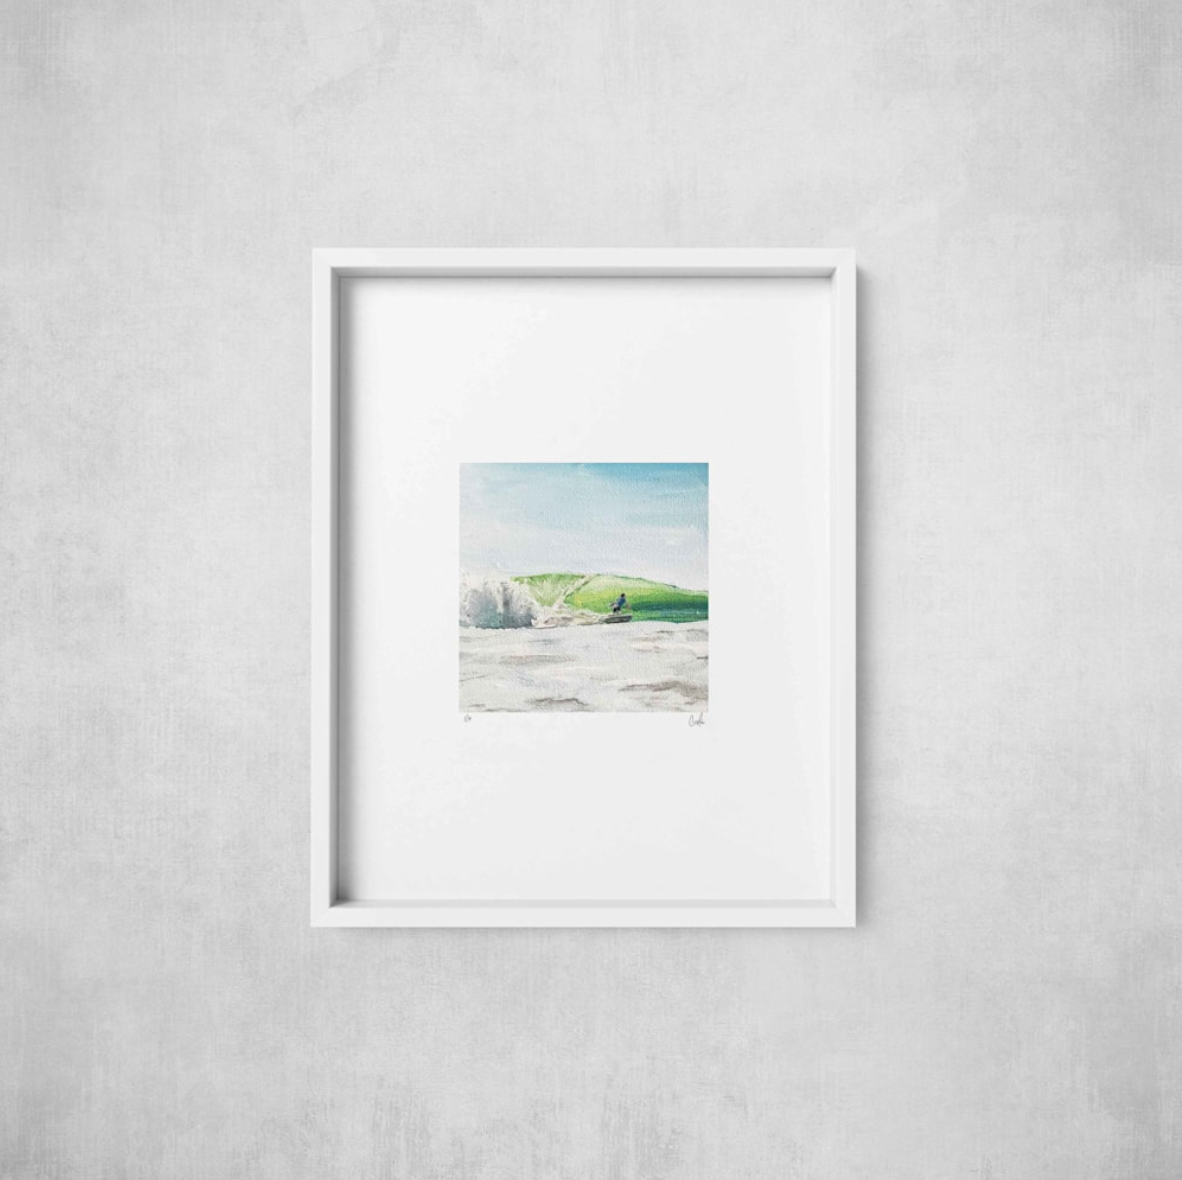 Surf's Up - Mini Print - Limited Edition